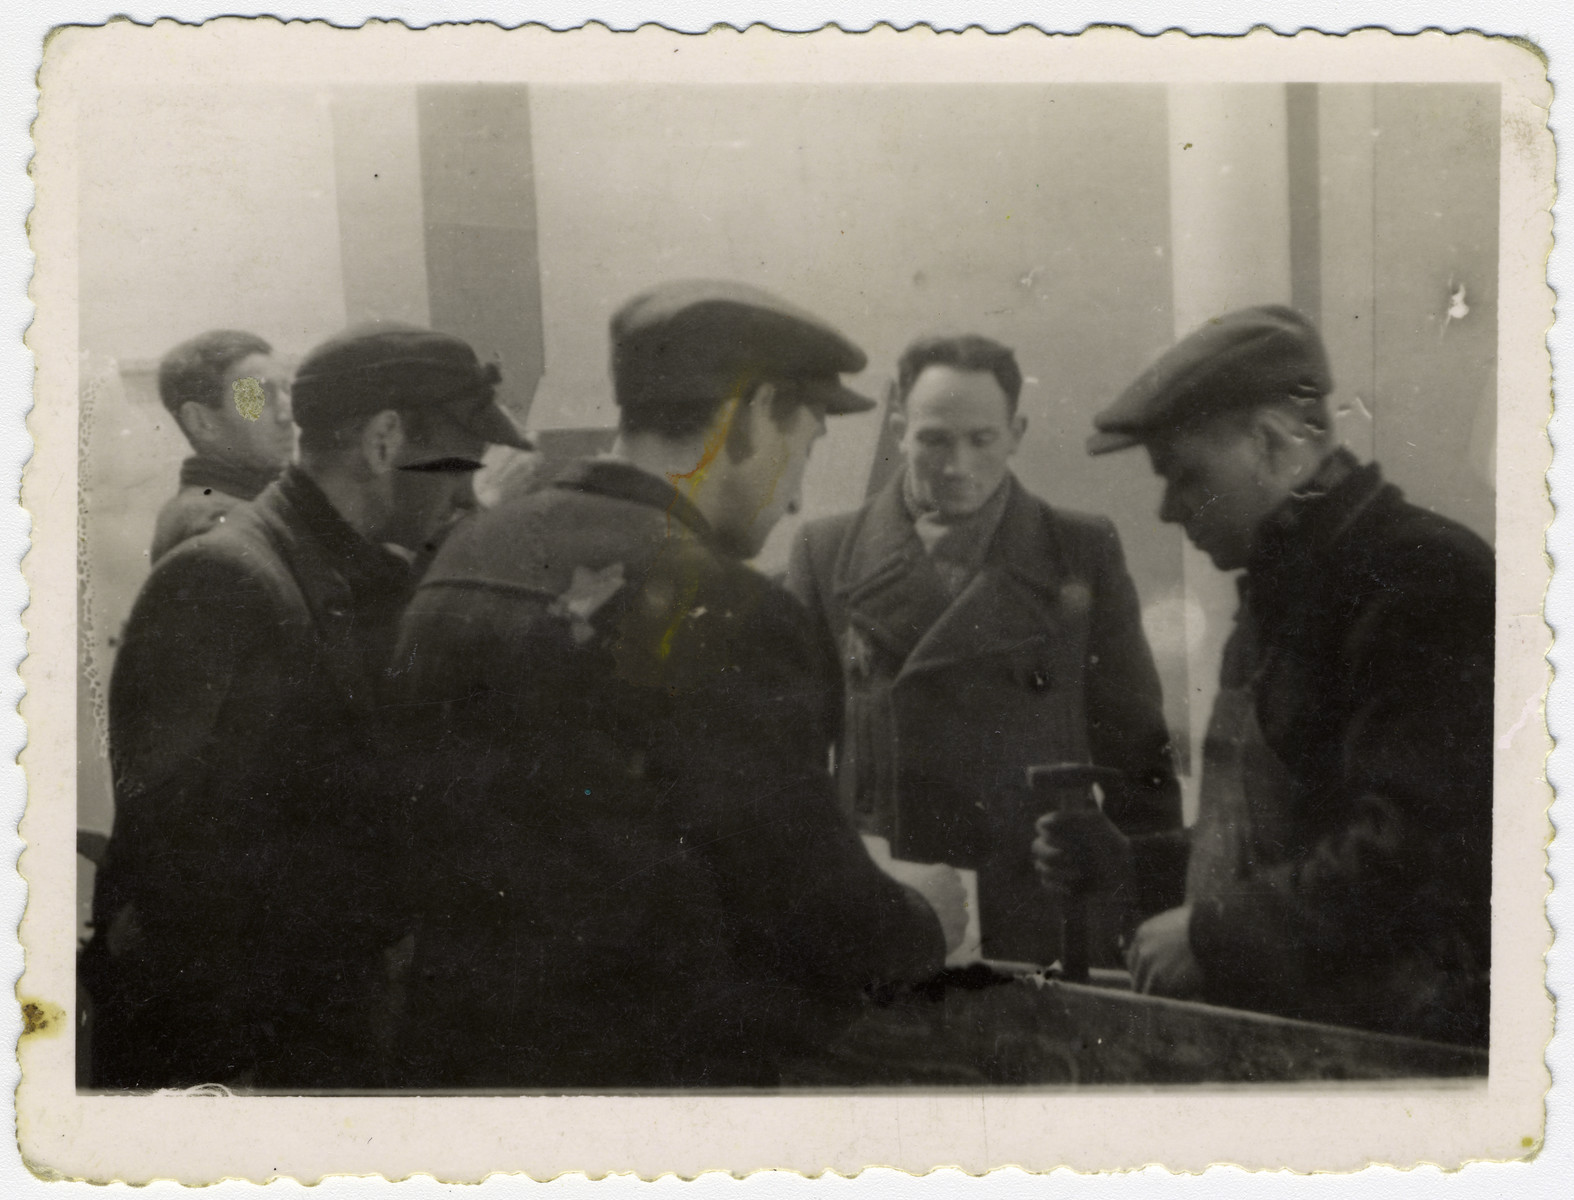 A group of Jewish men discuss their work in one of the Lodz ghetto workshops. 

Among those pictured, third from the left with the hat, is donor's brother-in-law, Josef Szwarc (later Schwartz).